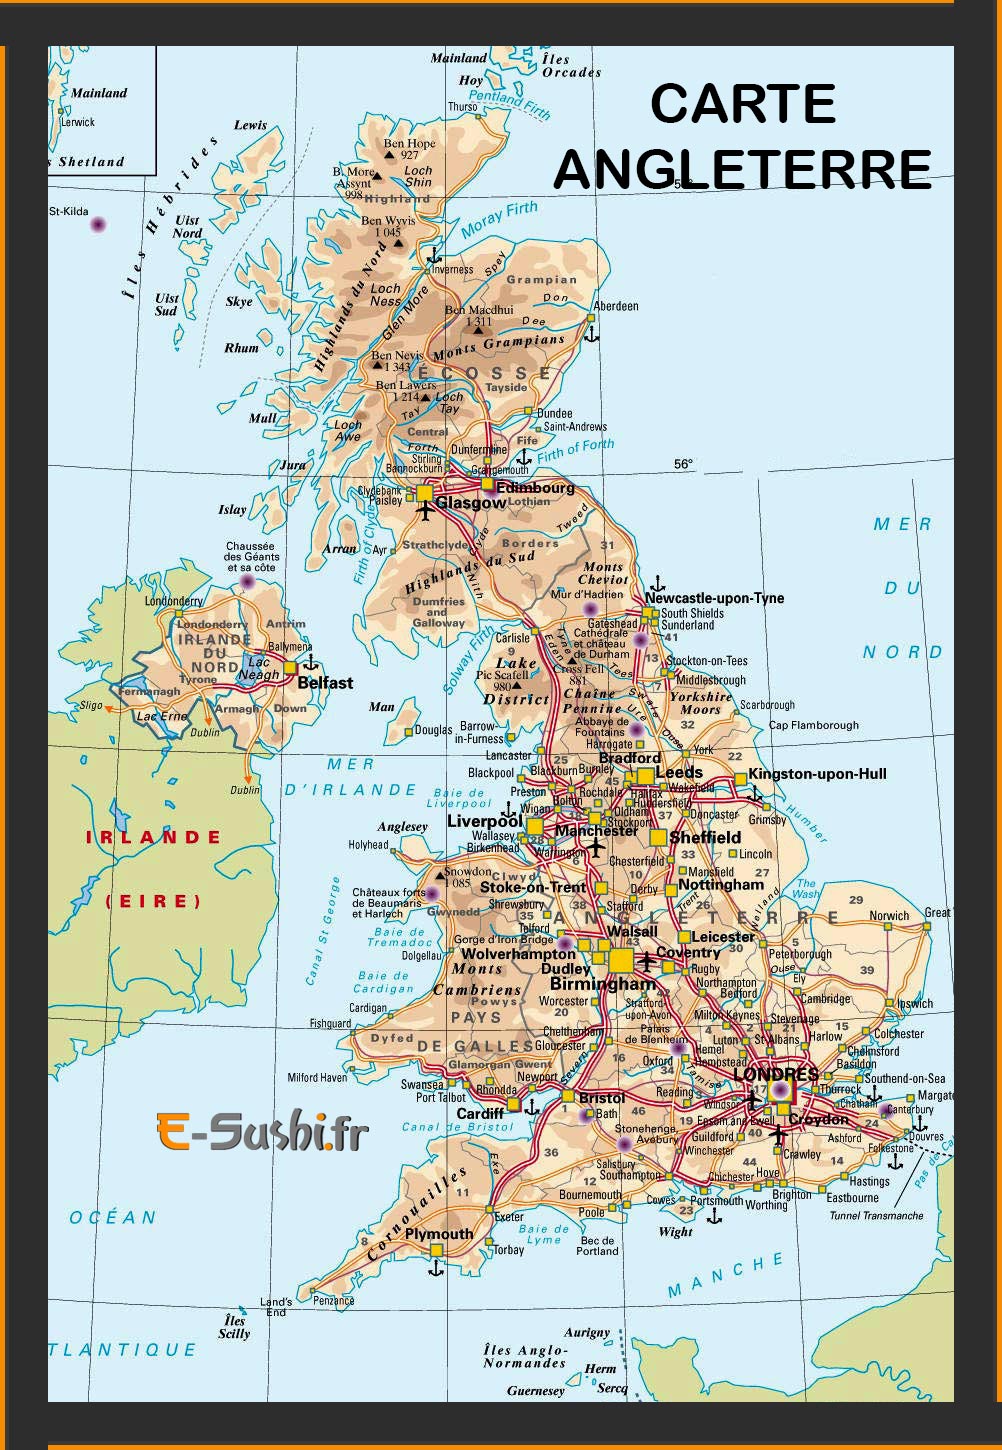 carte angleterre detaillee - Image